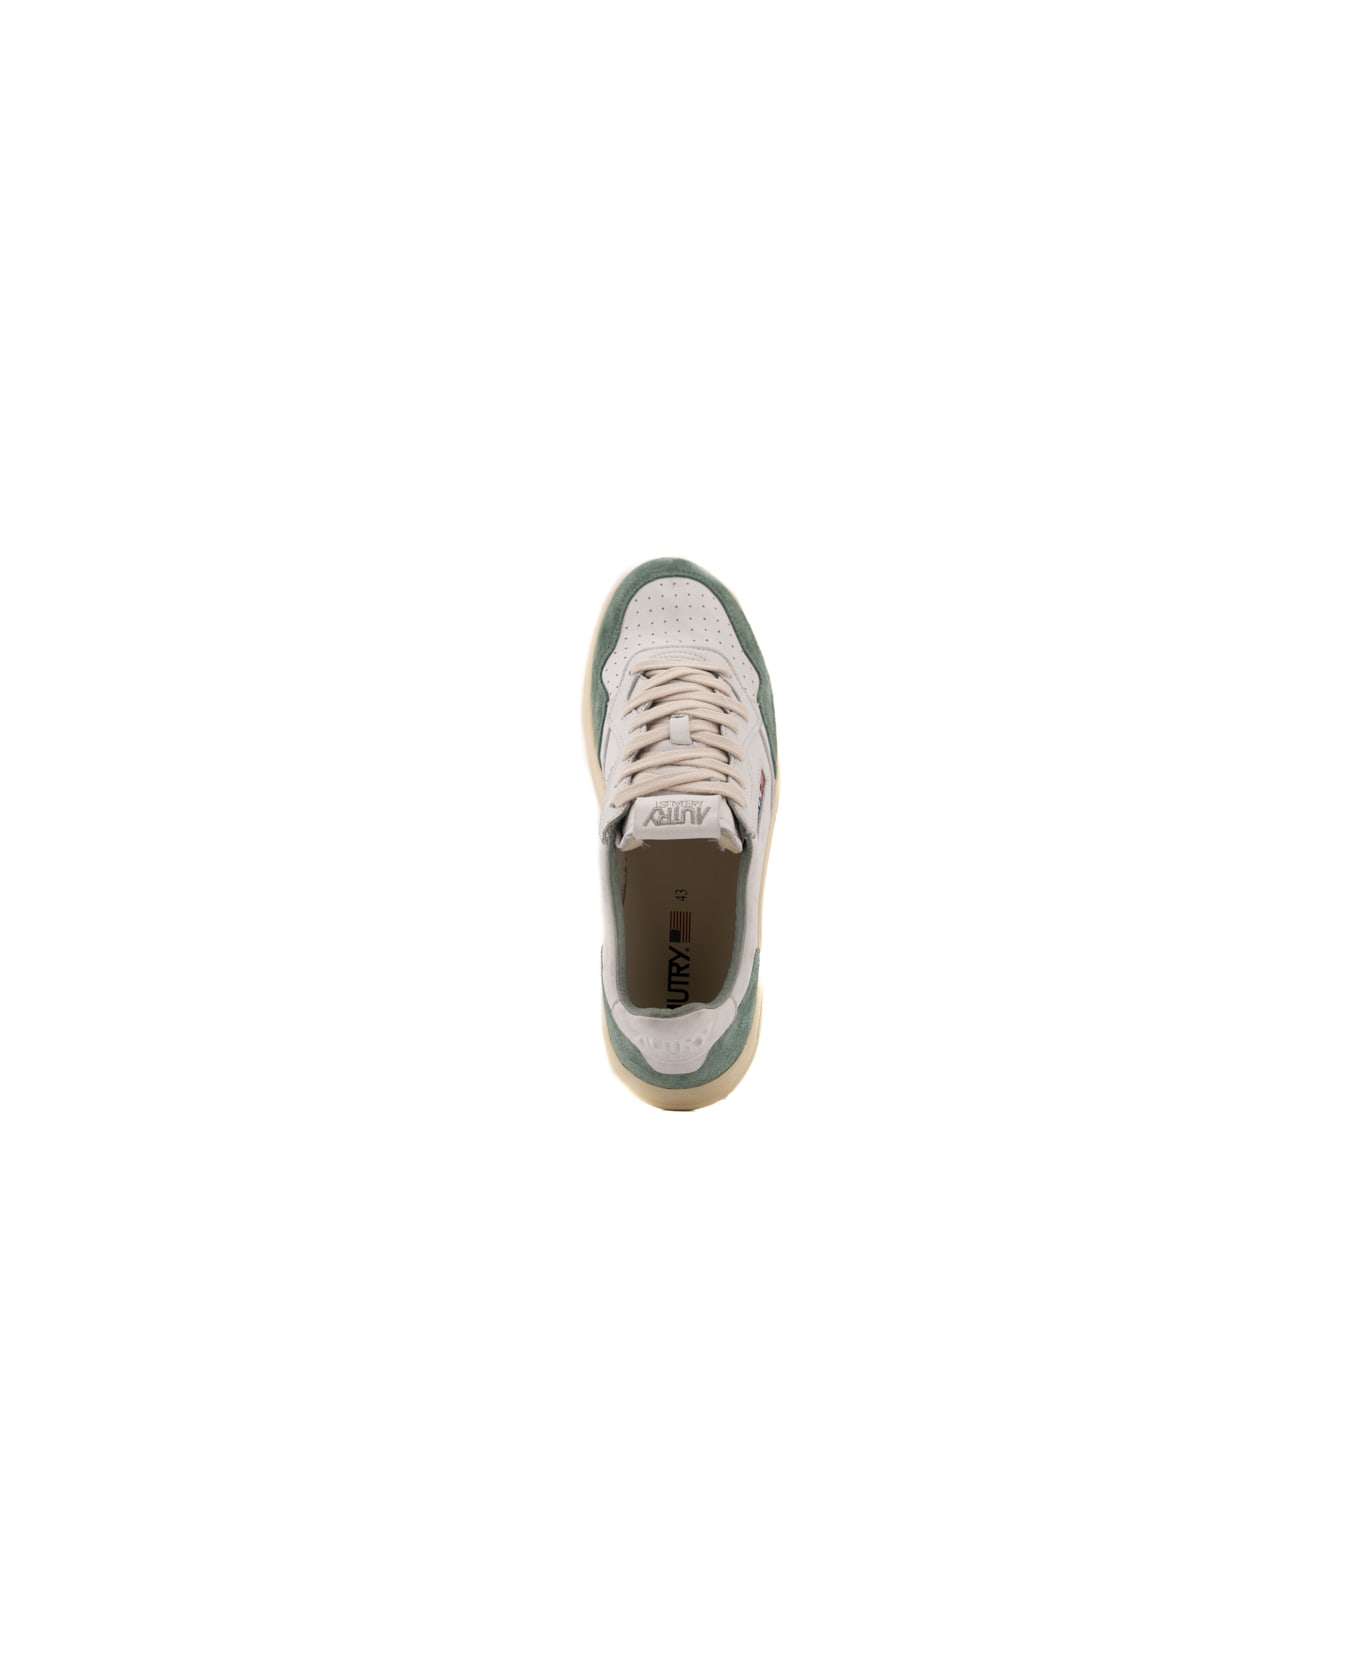 Autry Medalist Low Sneakers - White/mil スニーカー